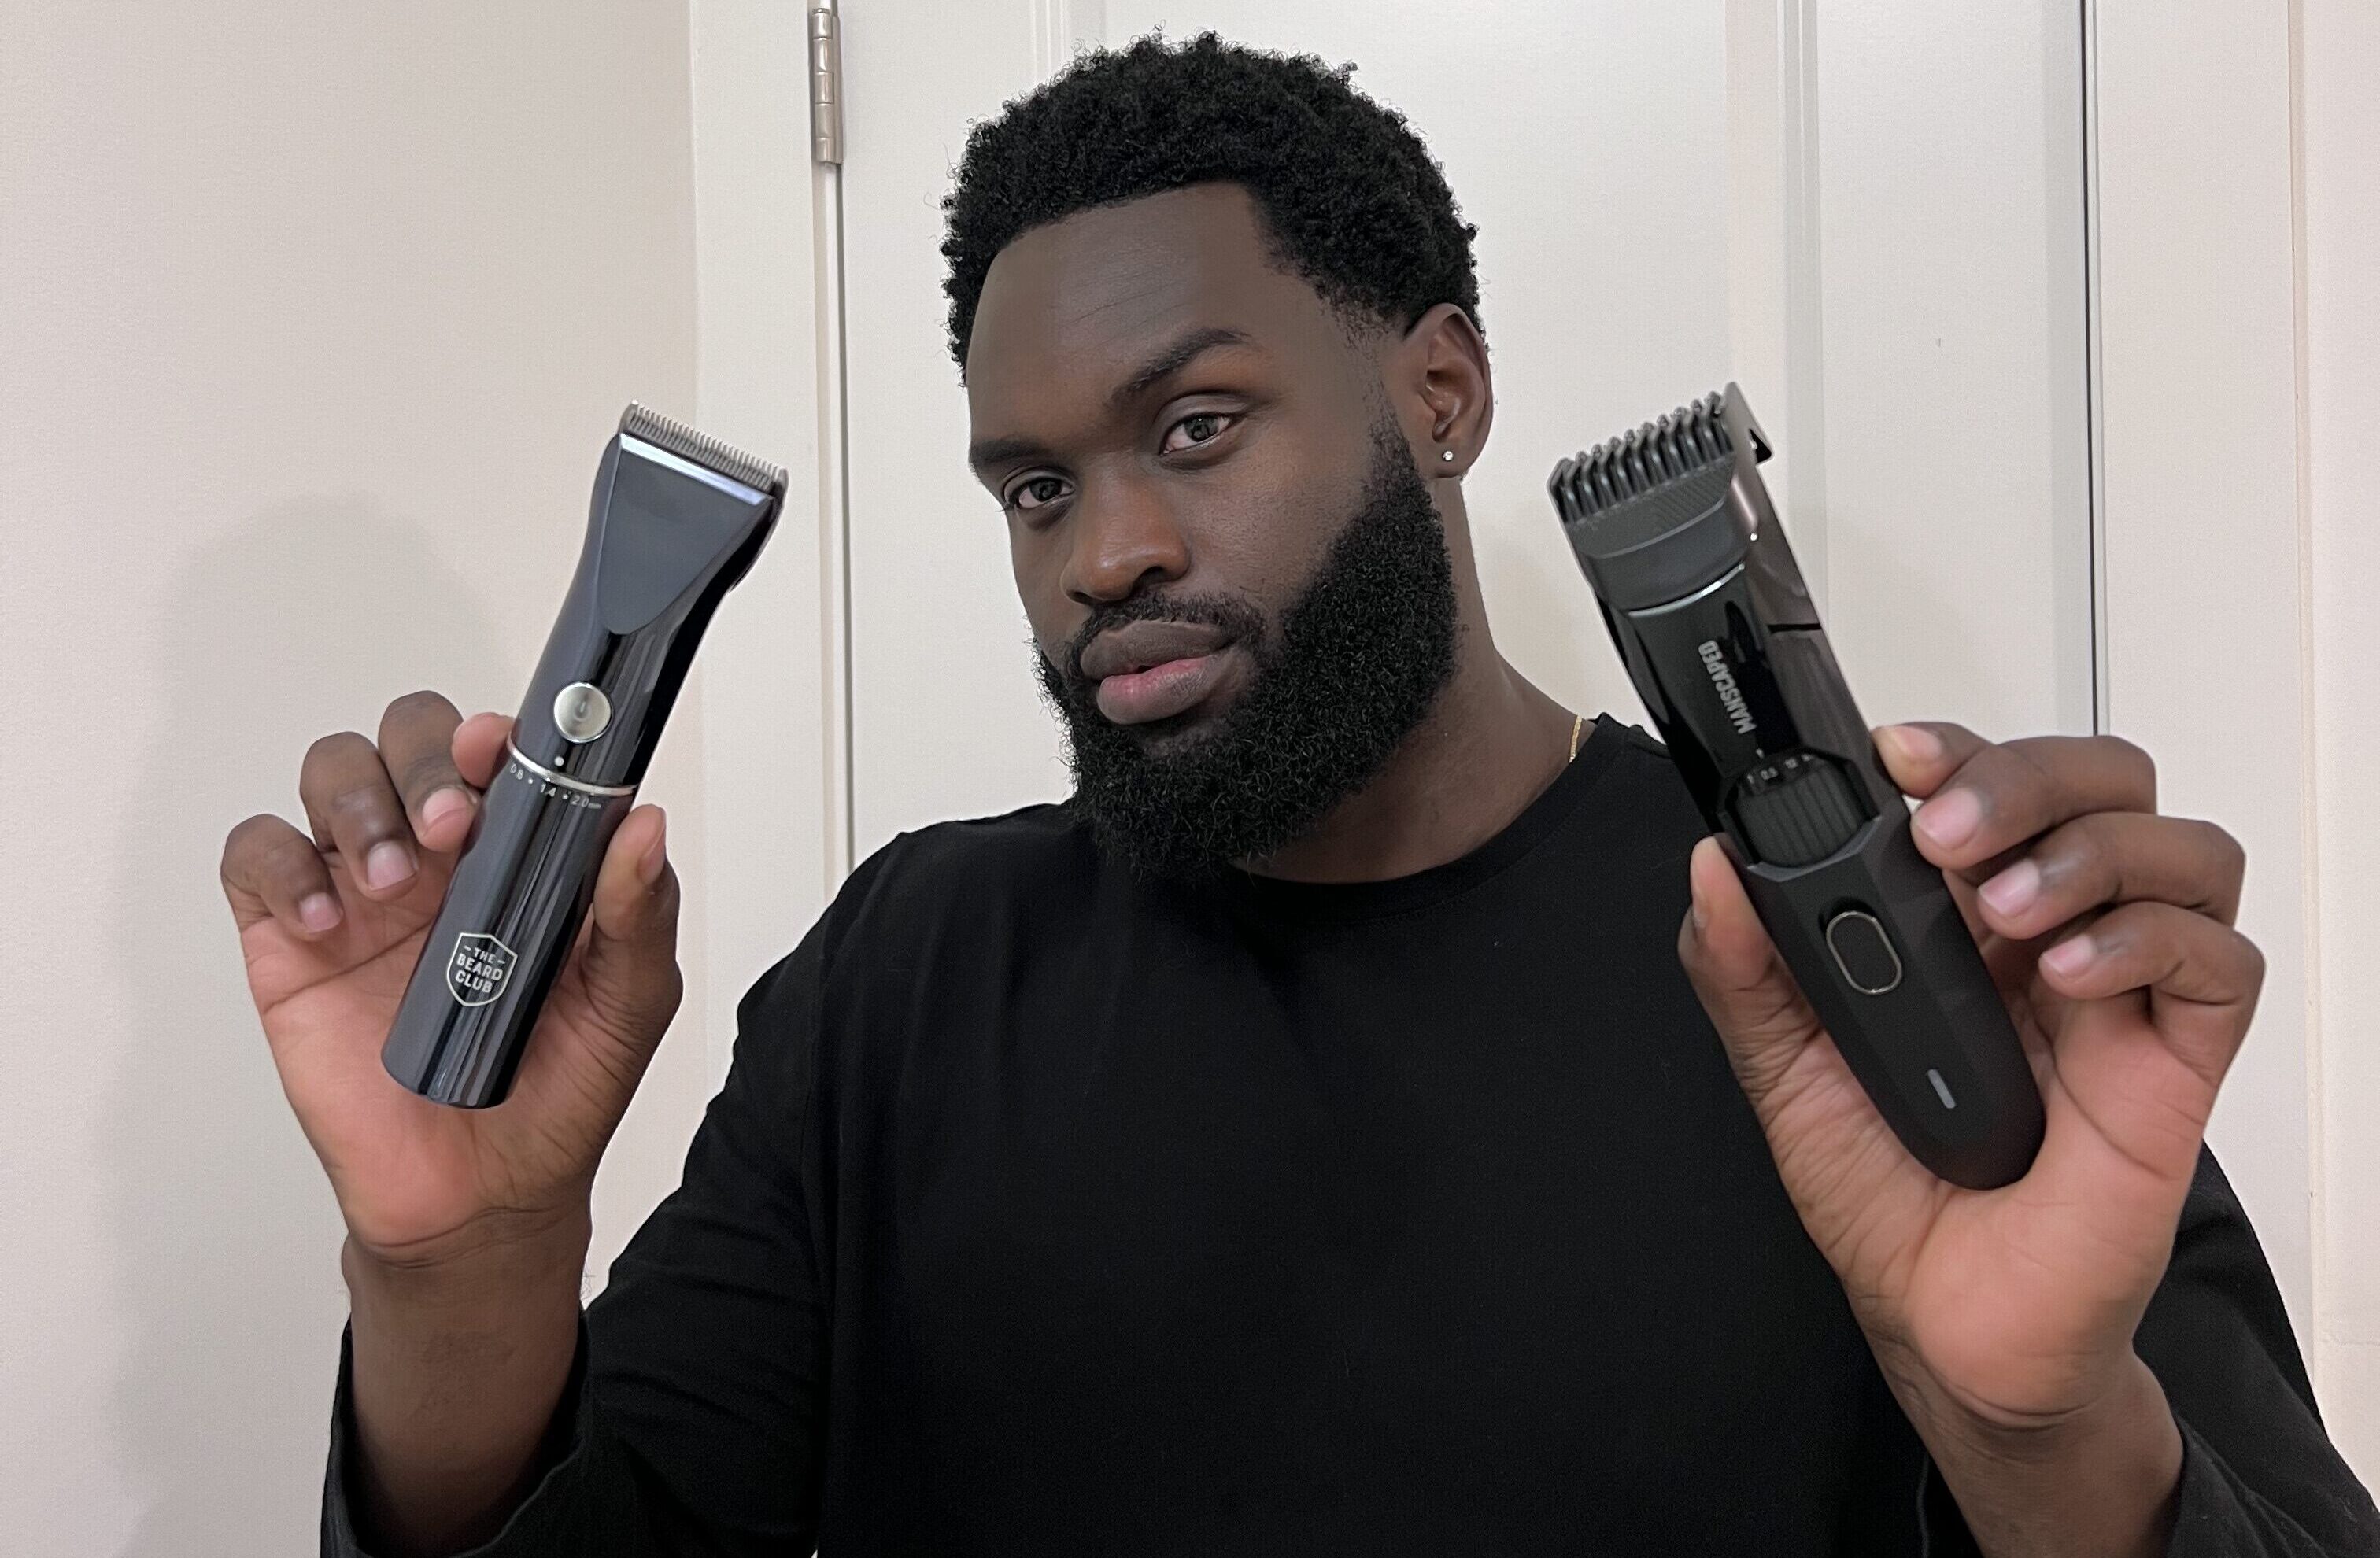 Beard Club vs. Manscaped – Who’s Got The Best Trimmer?